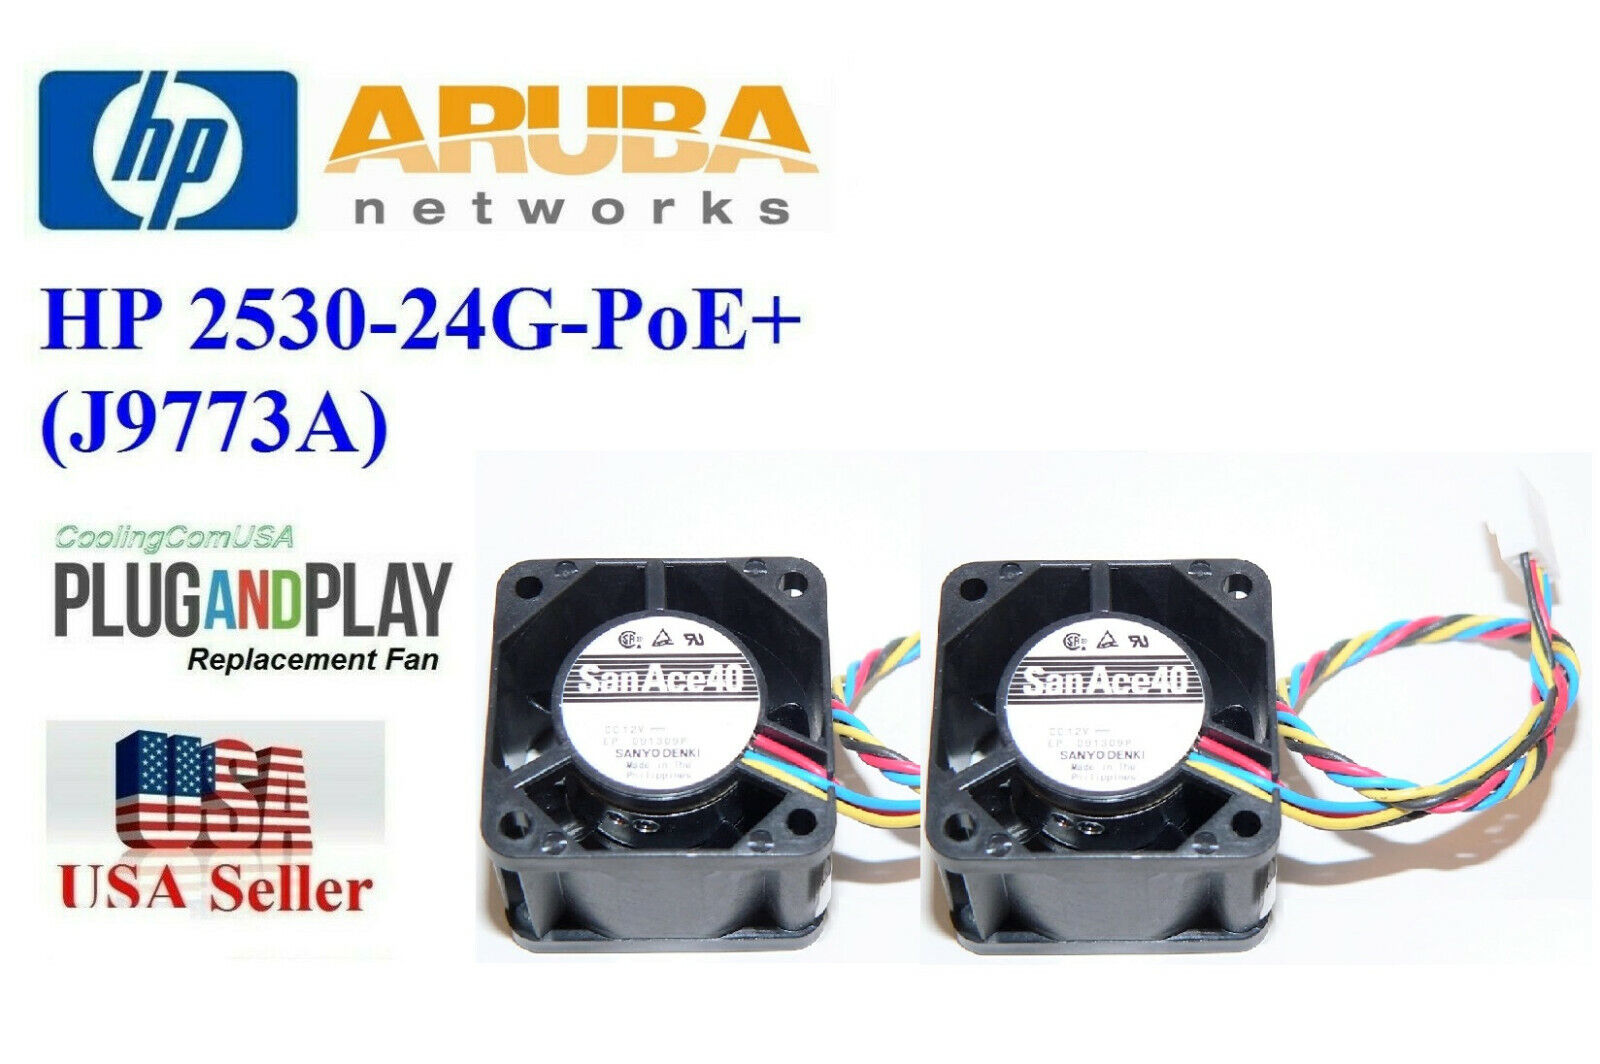 2x New Replacement Fans for Aruba HP 2530-24G-PoE+ (J9773A)